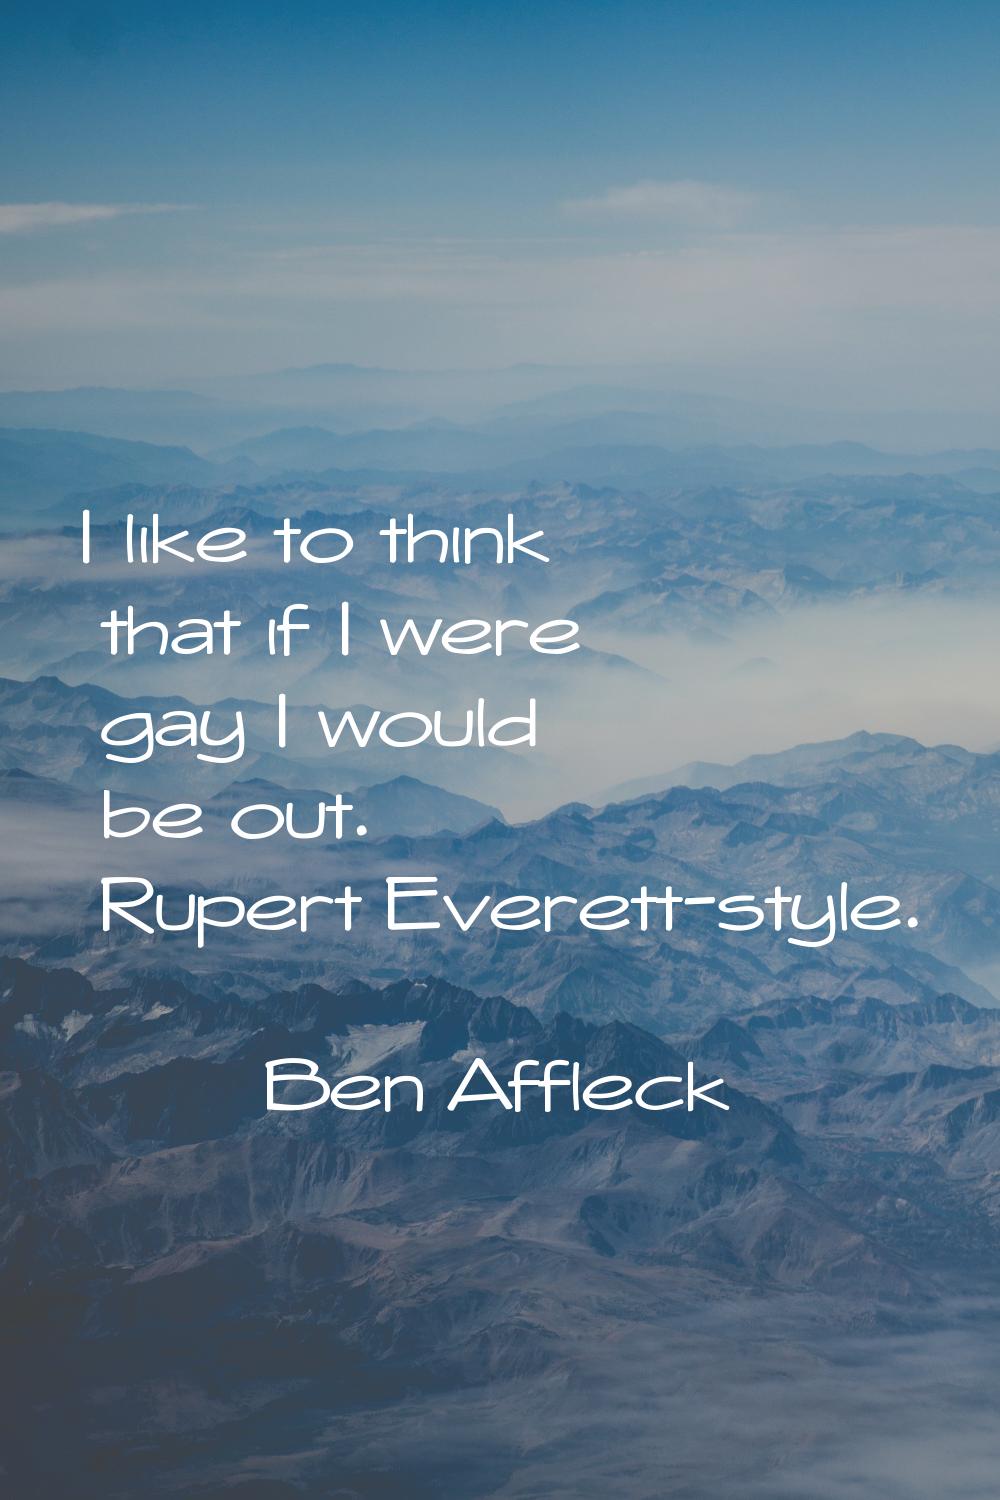 I like to think that if I were gay I would be out. Rupert Everett-style.